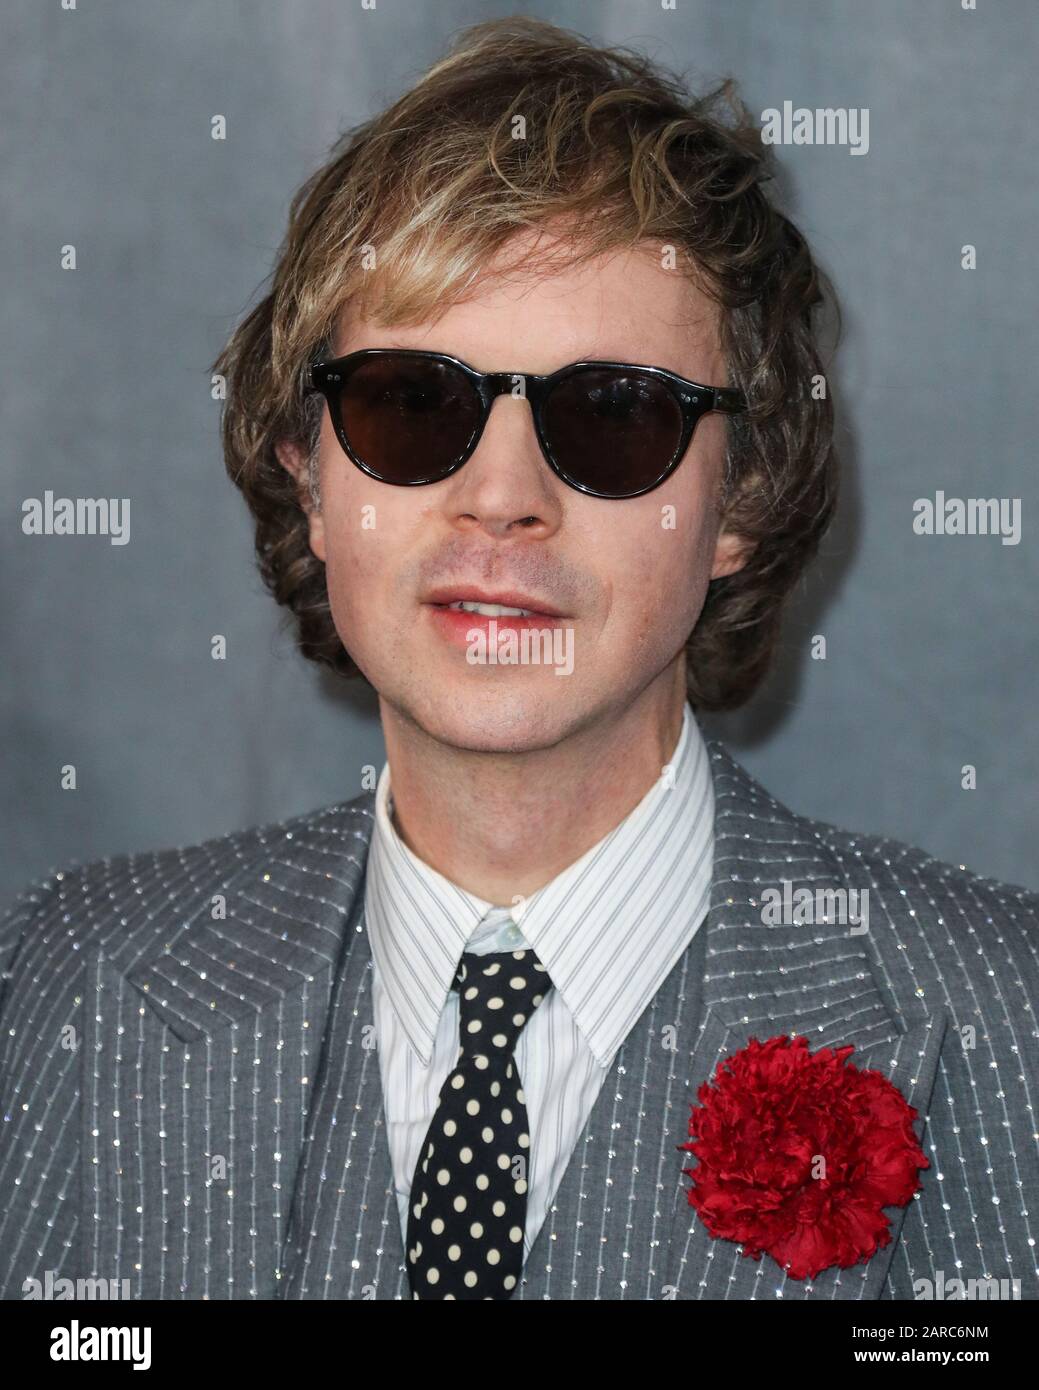 LOS ANGELES, CALIFORNIA, USA - JANUARY 26: Beck arrives at the 62nd Annual GRAMMY Awards held at Staples Center on January 26, 2020 in Los Angeles, California, United States. (Photo by Xavier Collin/Image Press Agency) Stock Photo